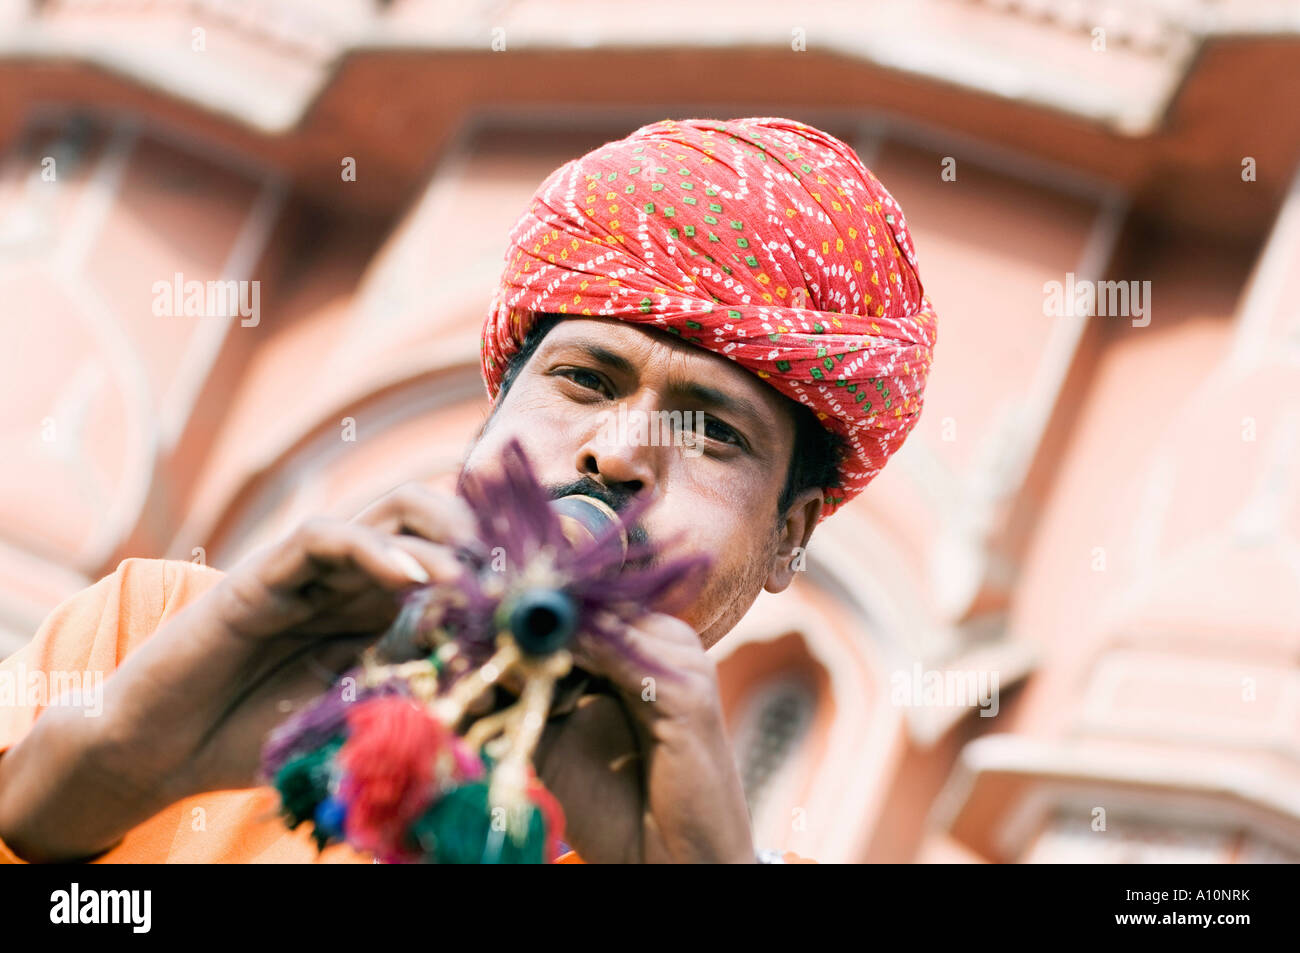 Portrait of a snake charmer playing a flute in front of a palace, Hawa Mahal, Jaipur, Rajasthan, India Stock Photo